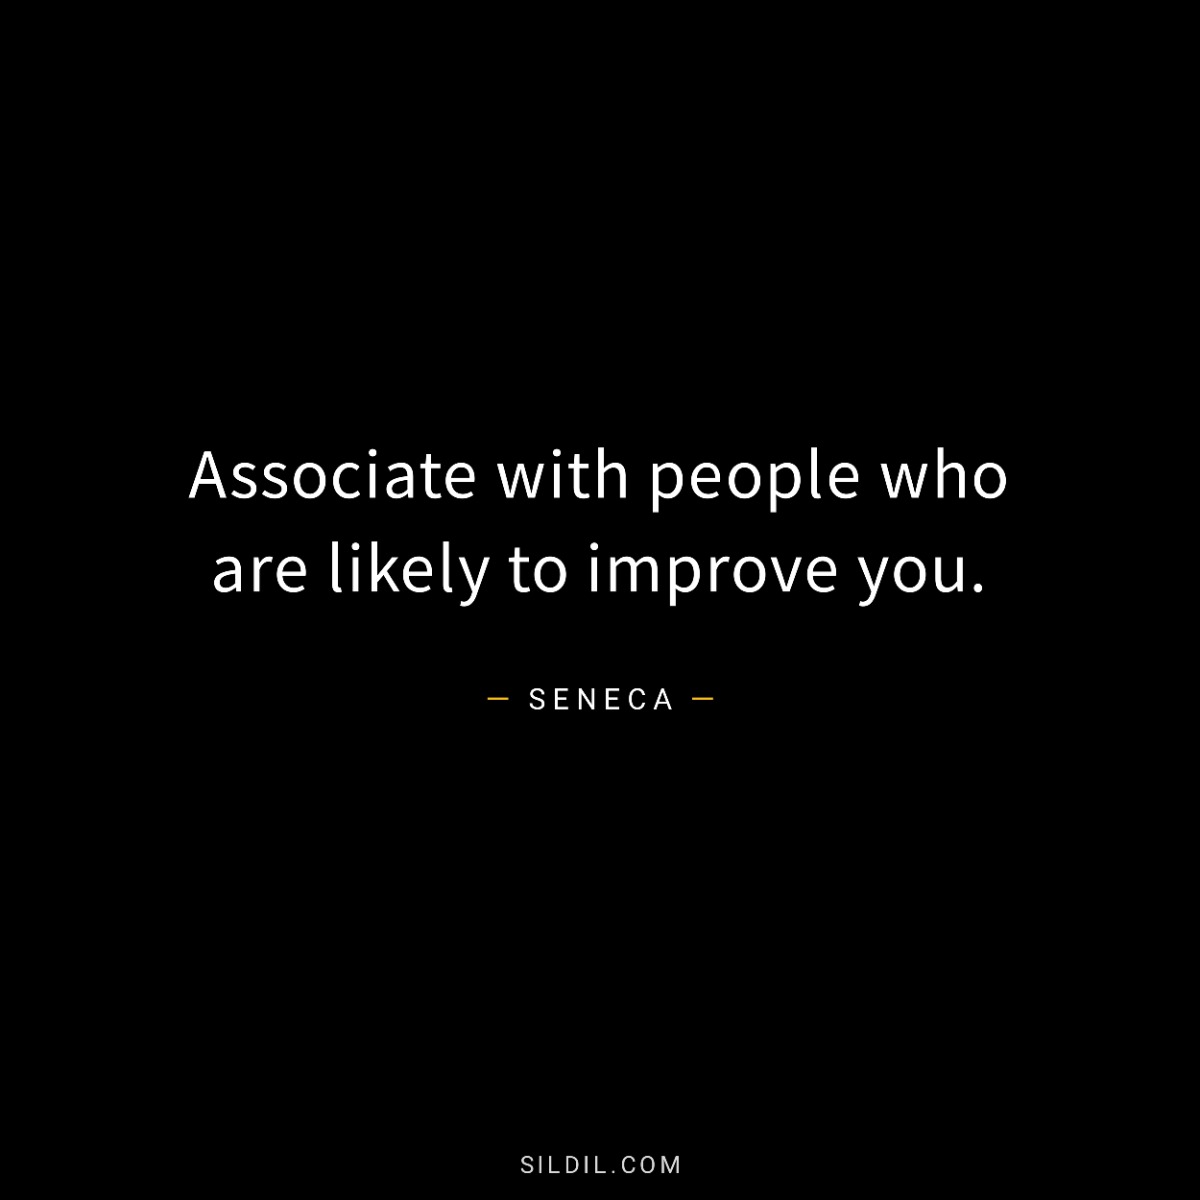 Associate with people who are likely to improve you.